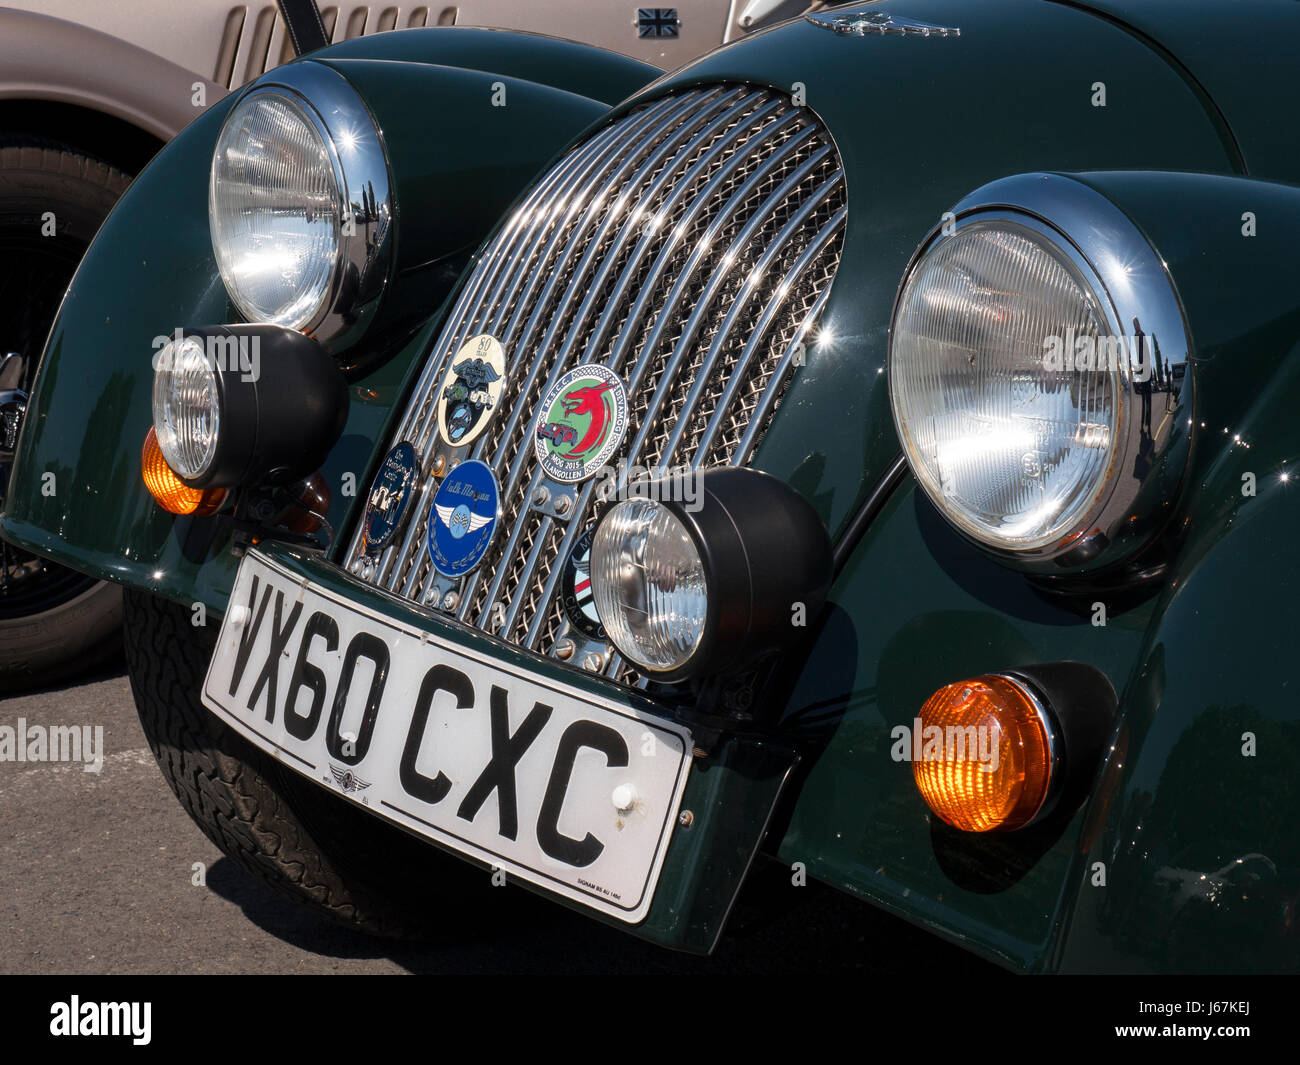 Morgan sports cars parked in the employee parking lot at the Malvern, England Morgan Motor Co. factory. Stock Photo